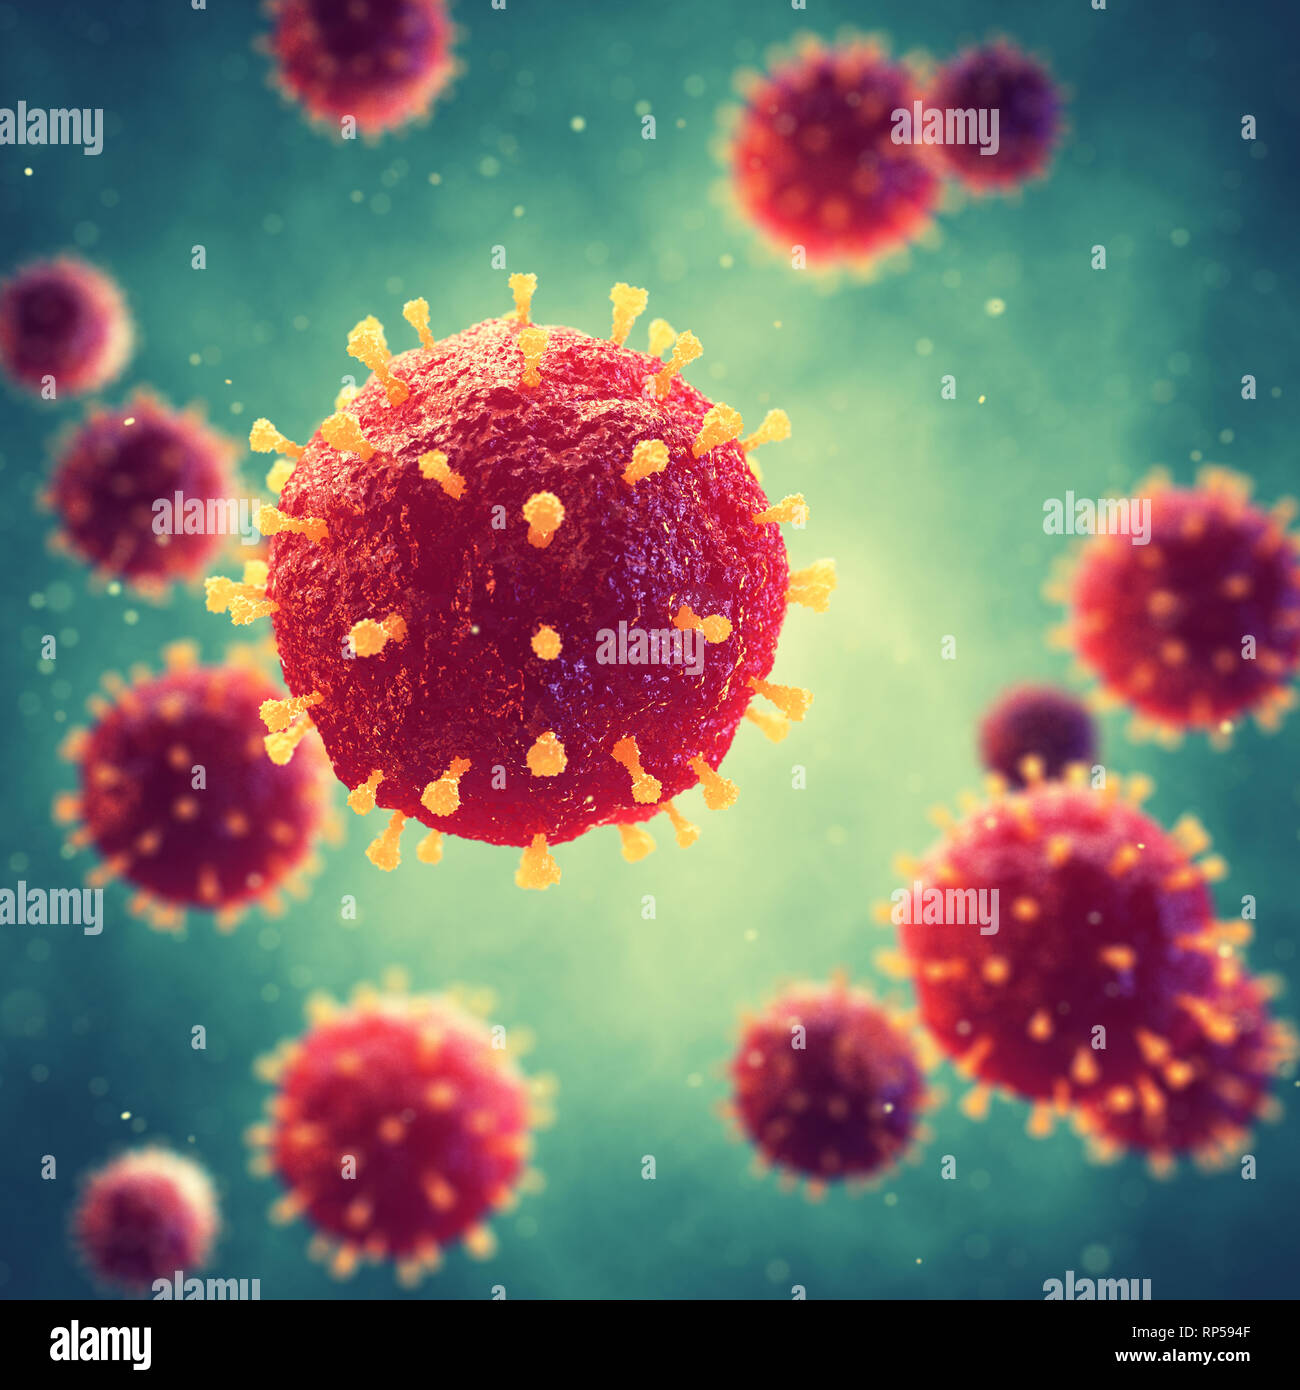 Pathogenic viruses causing infection in host organism, Viral disease outbreak Stock Photo